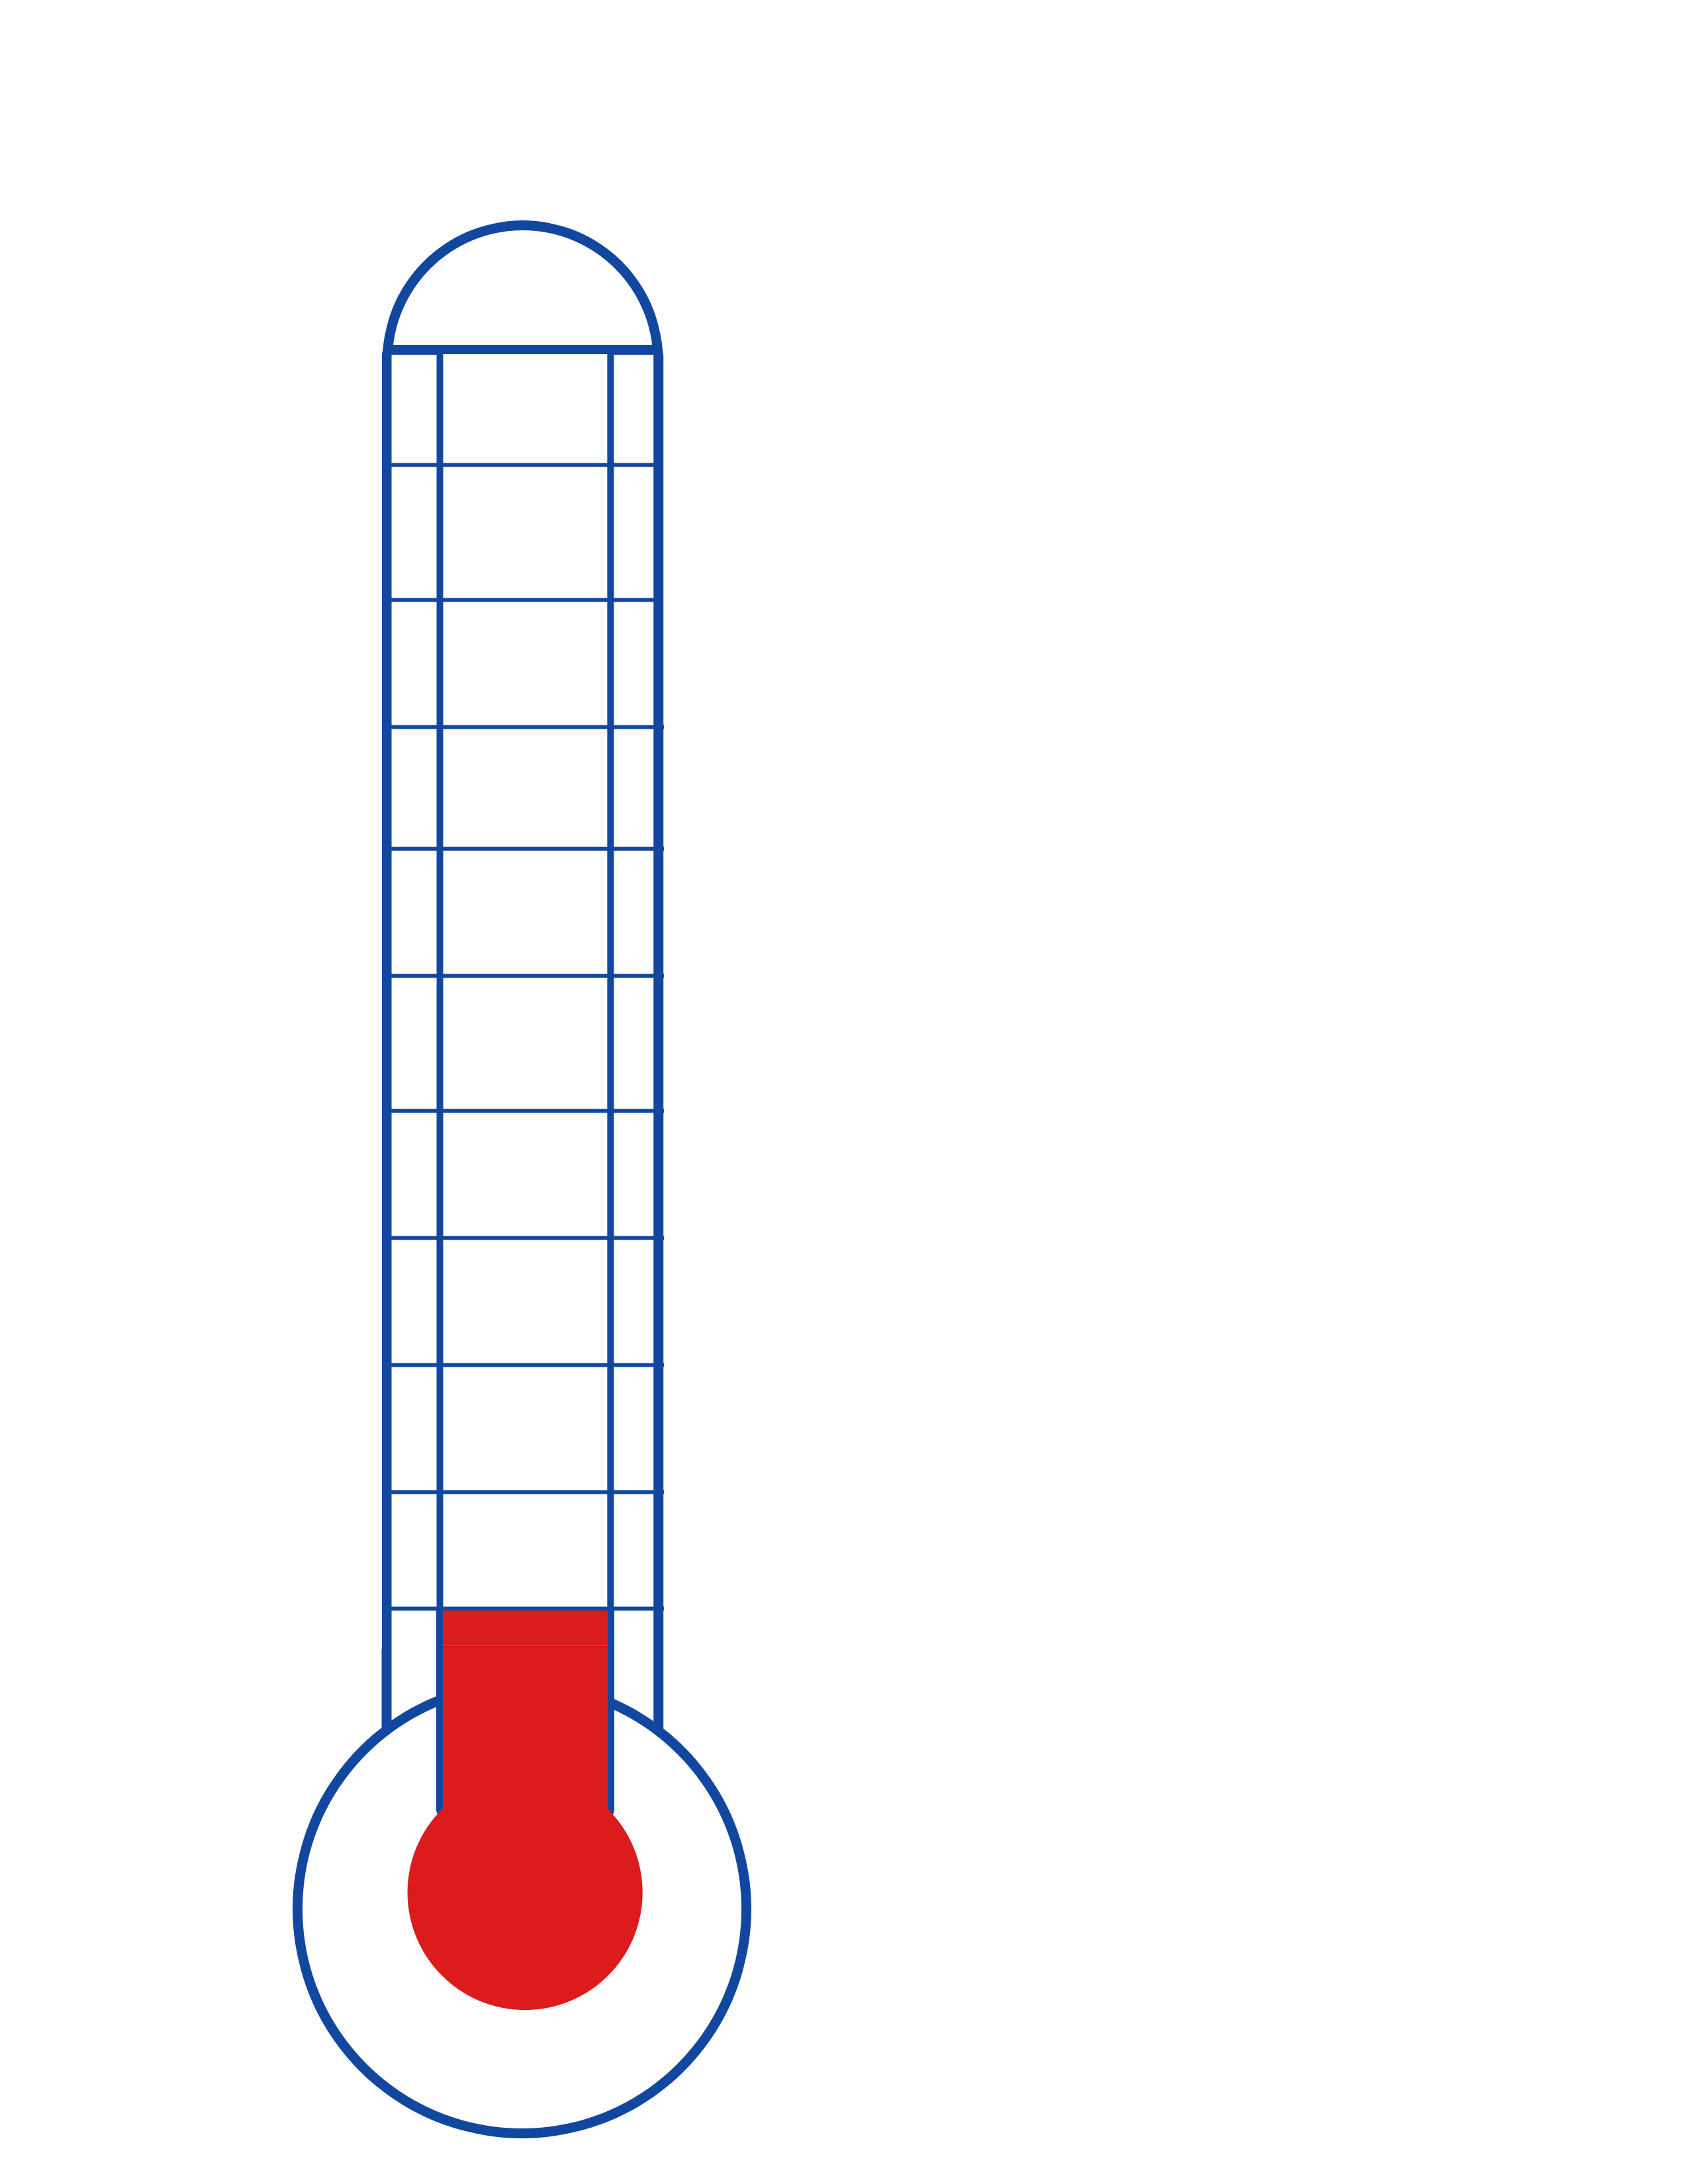 Goal Thermometer - ClipArt Best